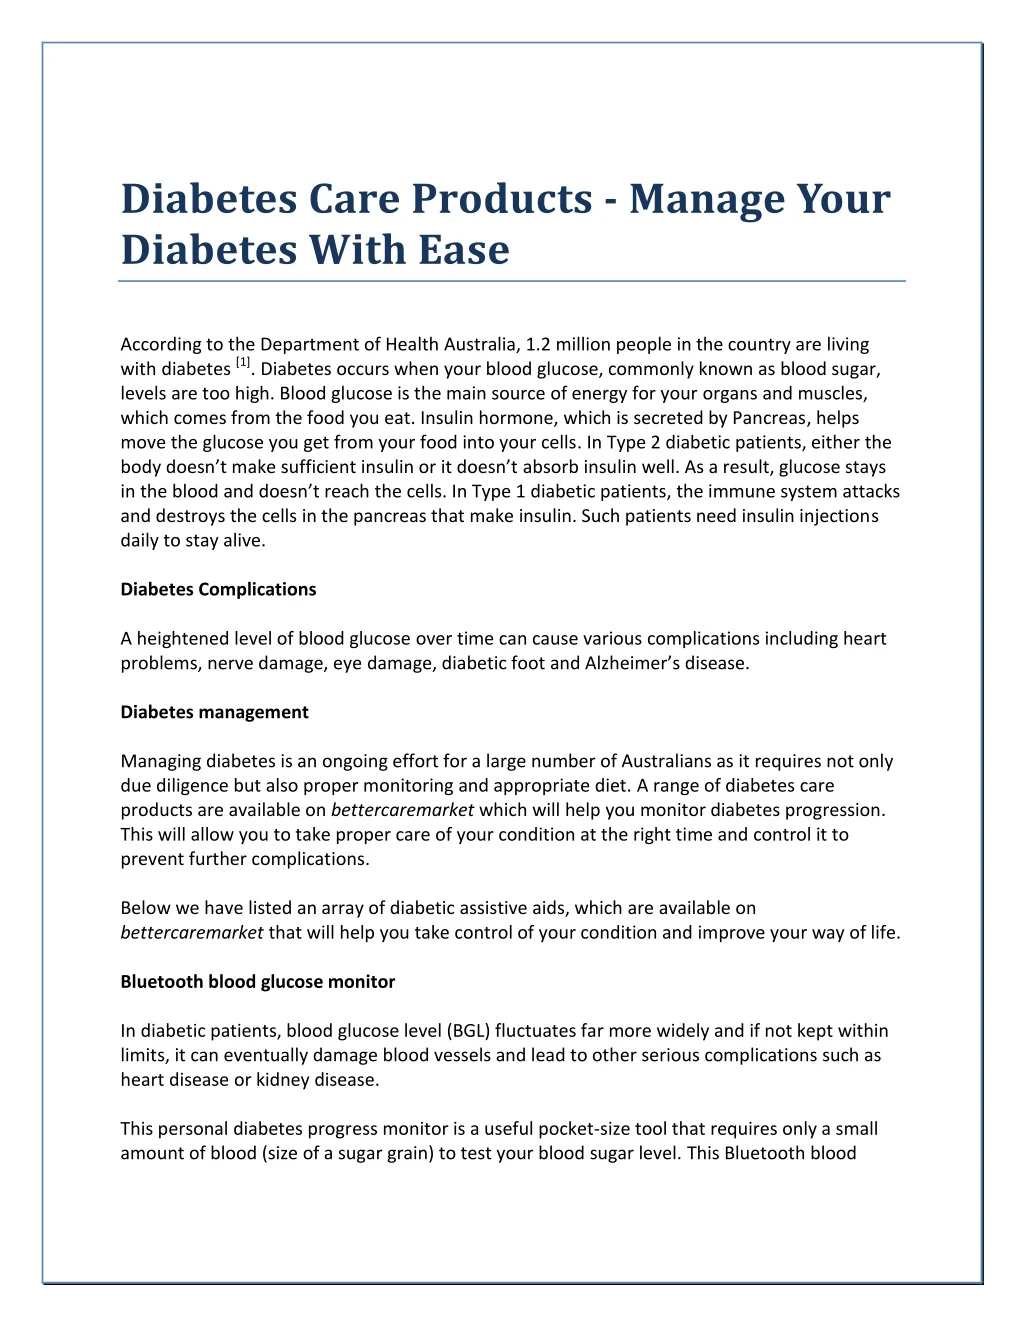 diabetes care products manage your diabetes with